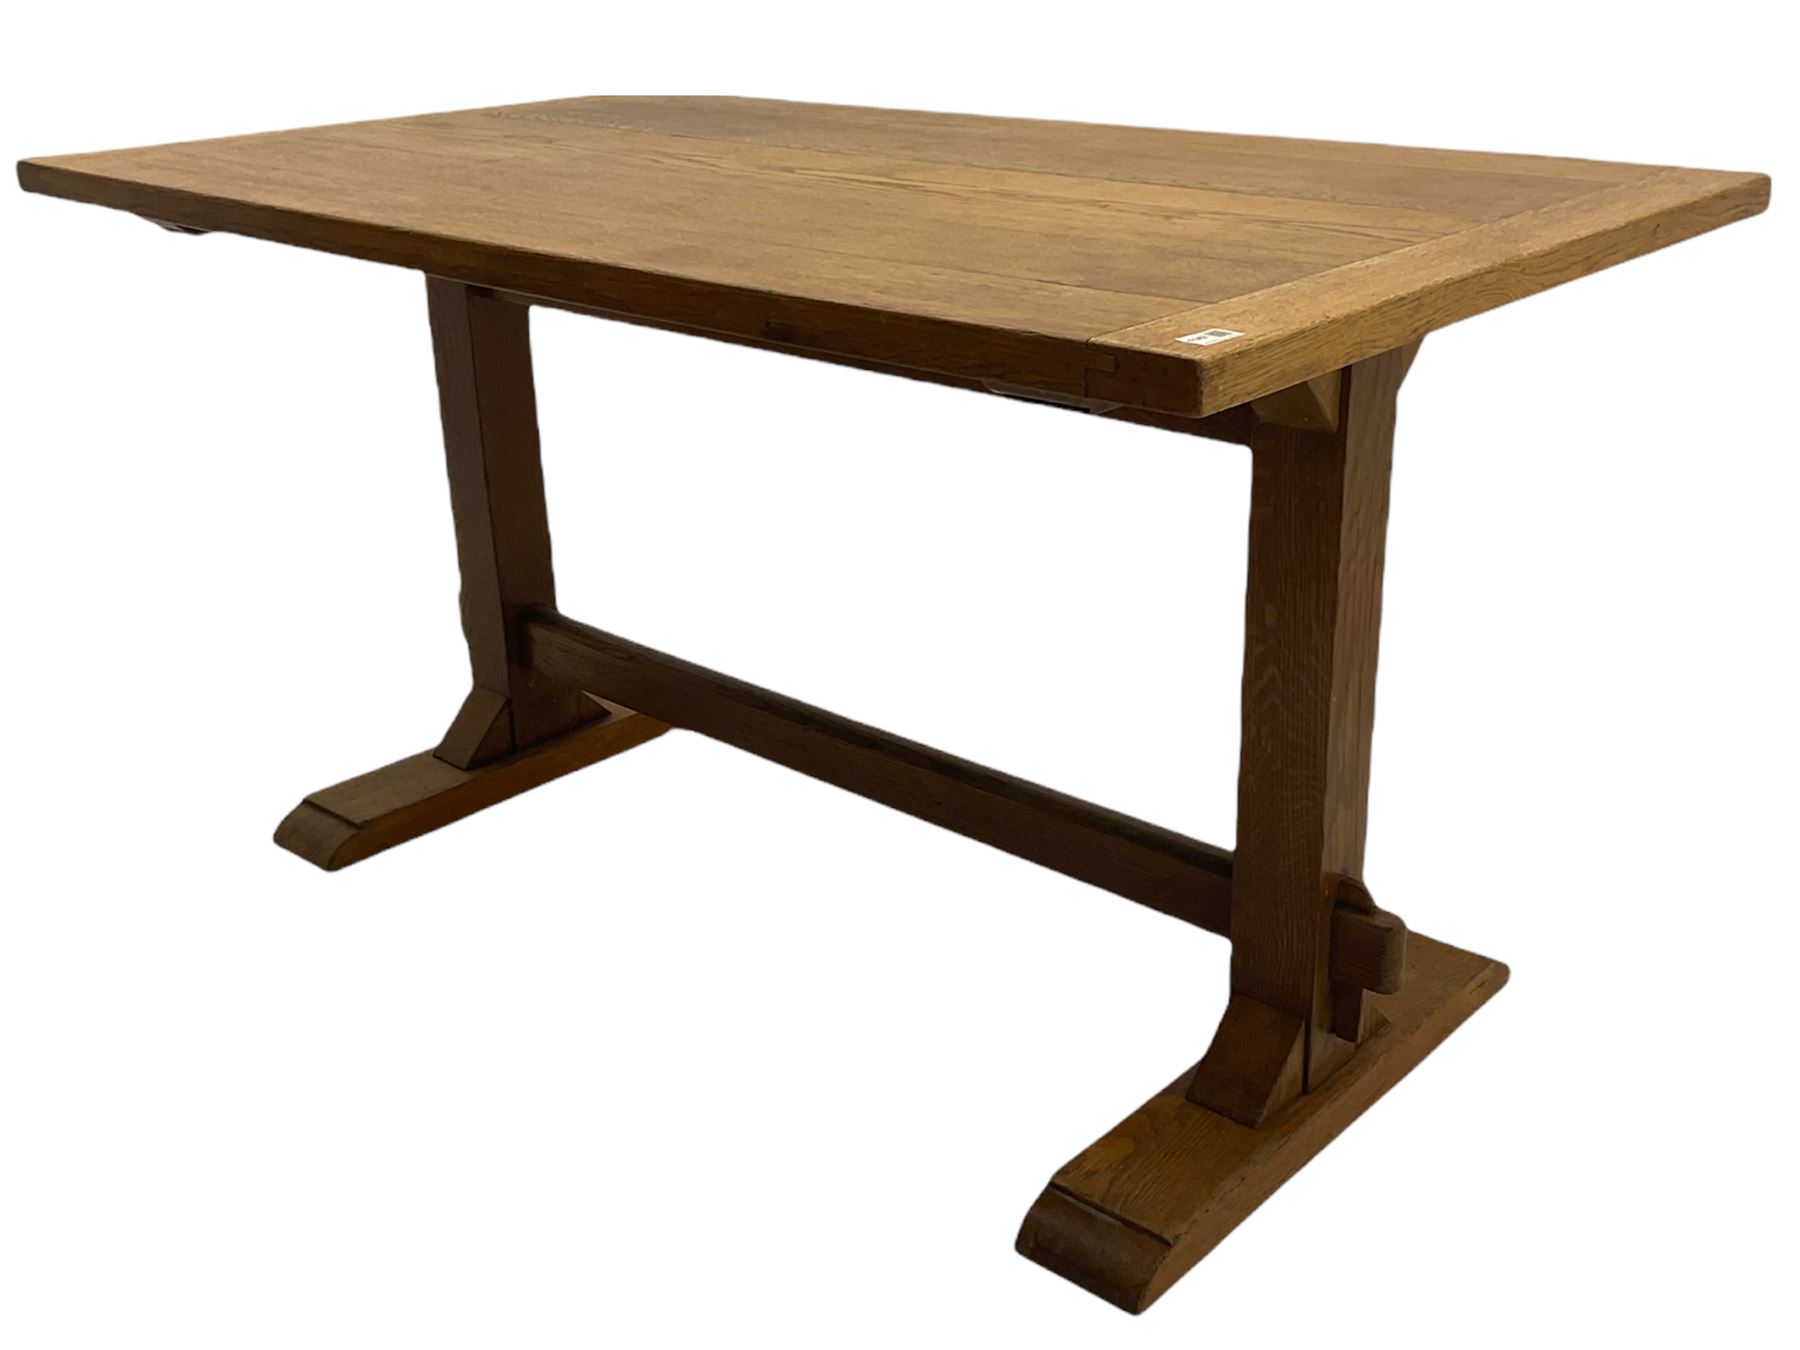 Rowntrees of Scarborough - mid 20th century oak rectangular dining table - Image 3 of 6